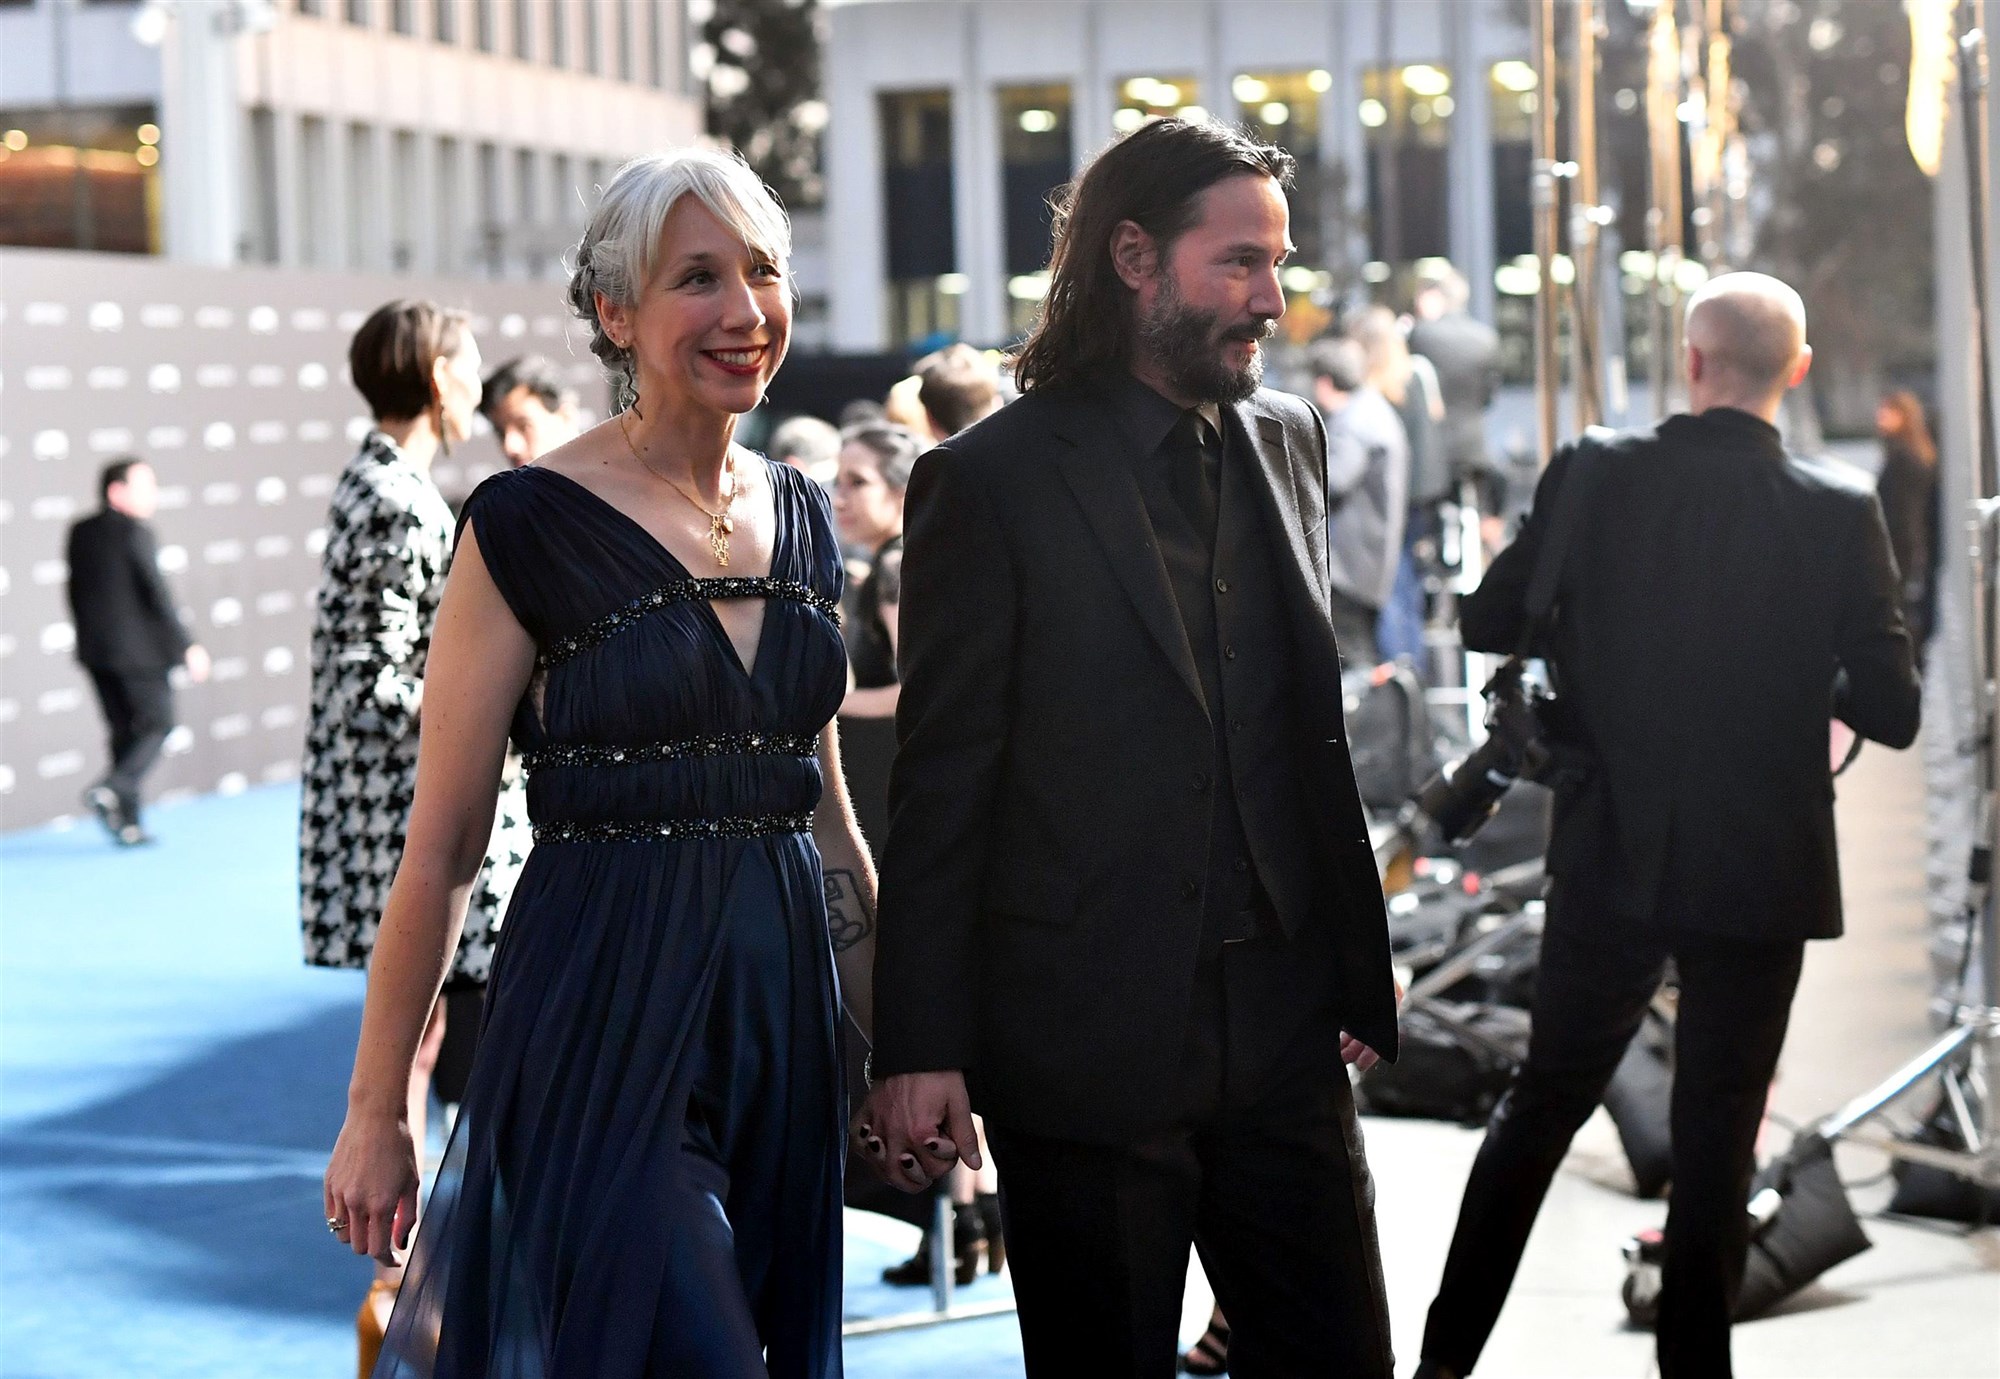 Keanu Reeves pictured holding hands with artist Alexandra Grant on the red carpet in LA